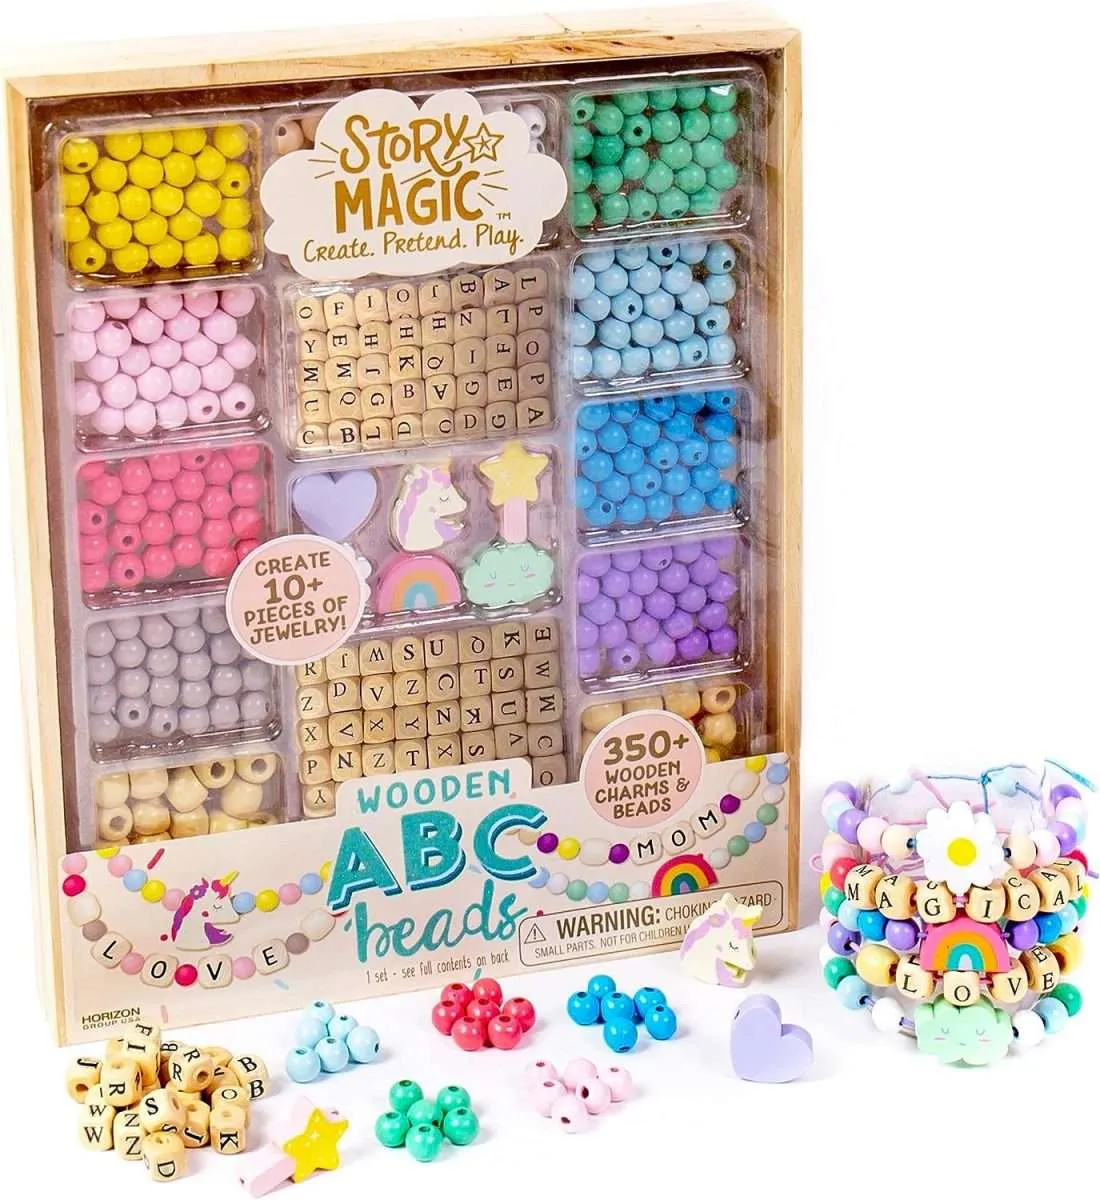 Story Magic Wooden ABC Bead Kit, Premium Wood Jewelry Making Kit, 350+  Wooden Beads & Charms for Beading Bracelets, Great for Playdates &  Sleepovers, Arts & Crafts Kit Set for Kids Ages